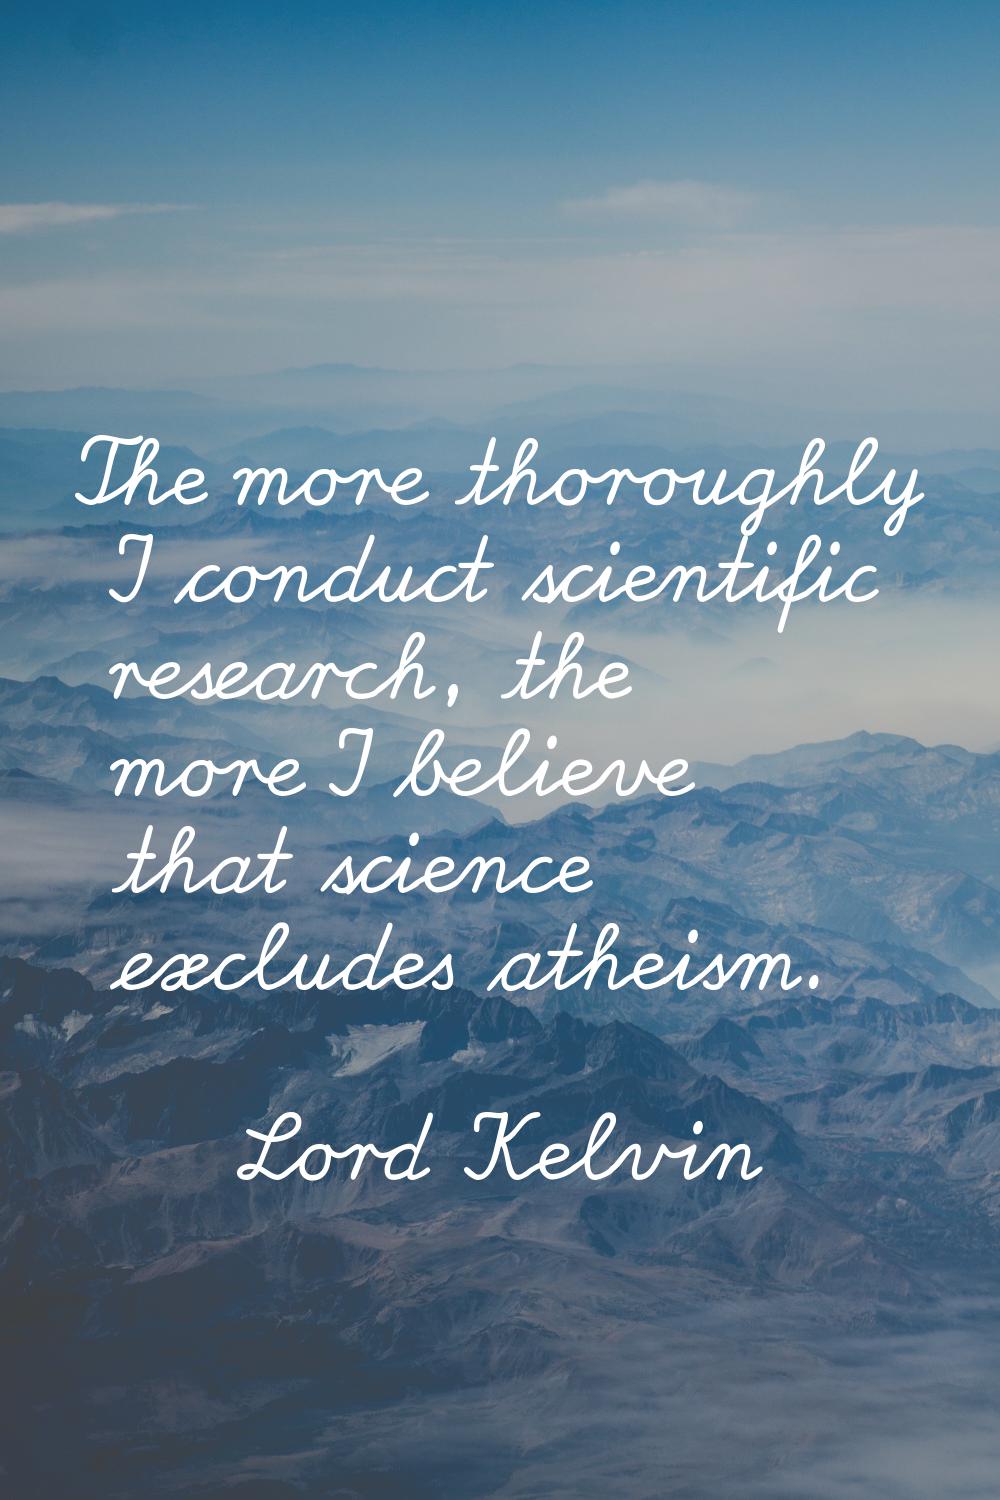 The more thoroughly I conduct scientific research, the more I believe that science excludes atheism